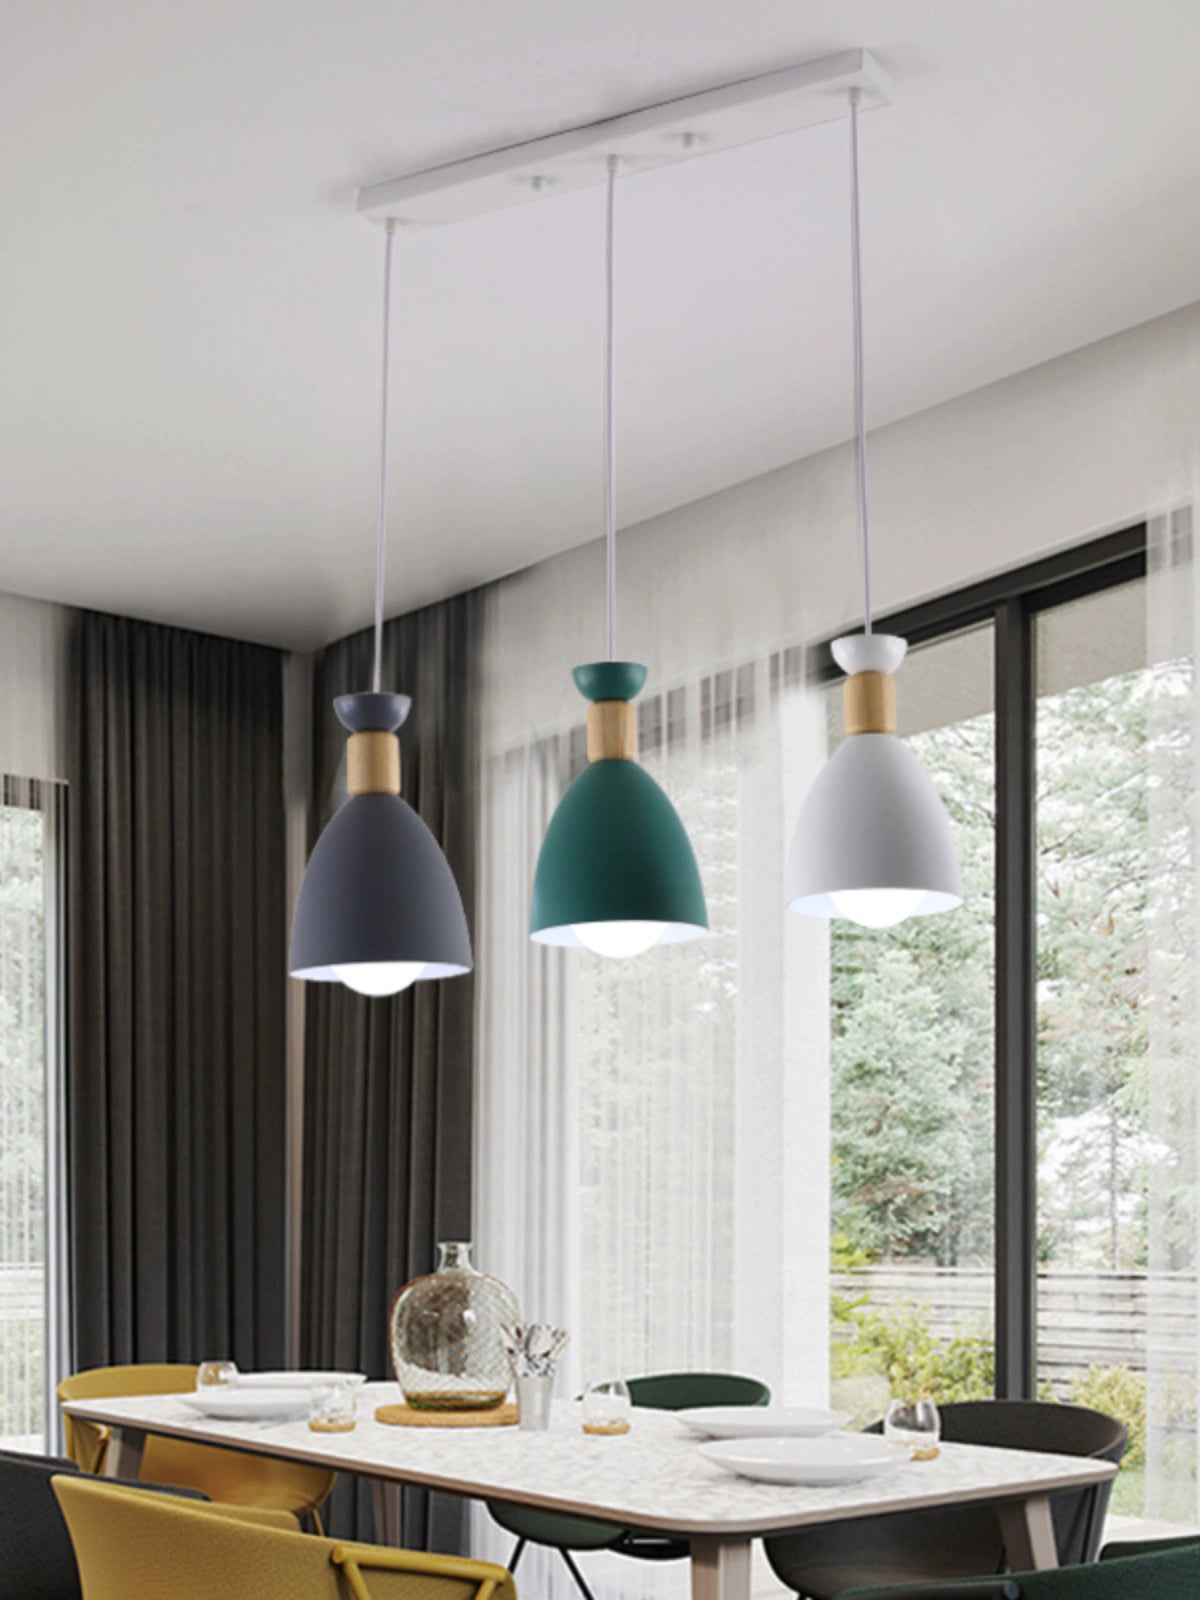 Nordic three-head household long macaron  lamp modern (Shipping not included)